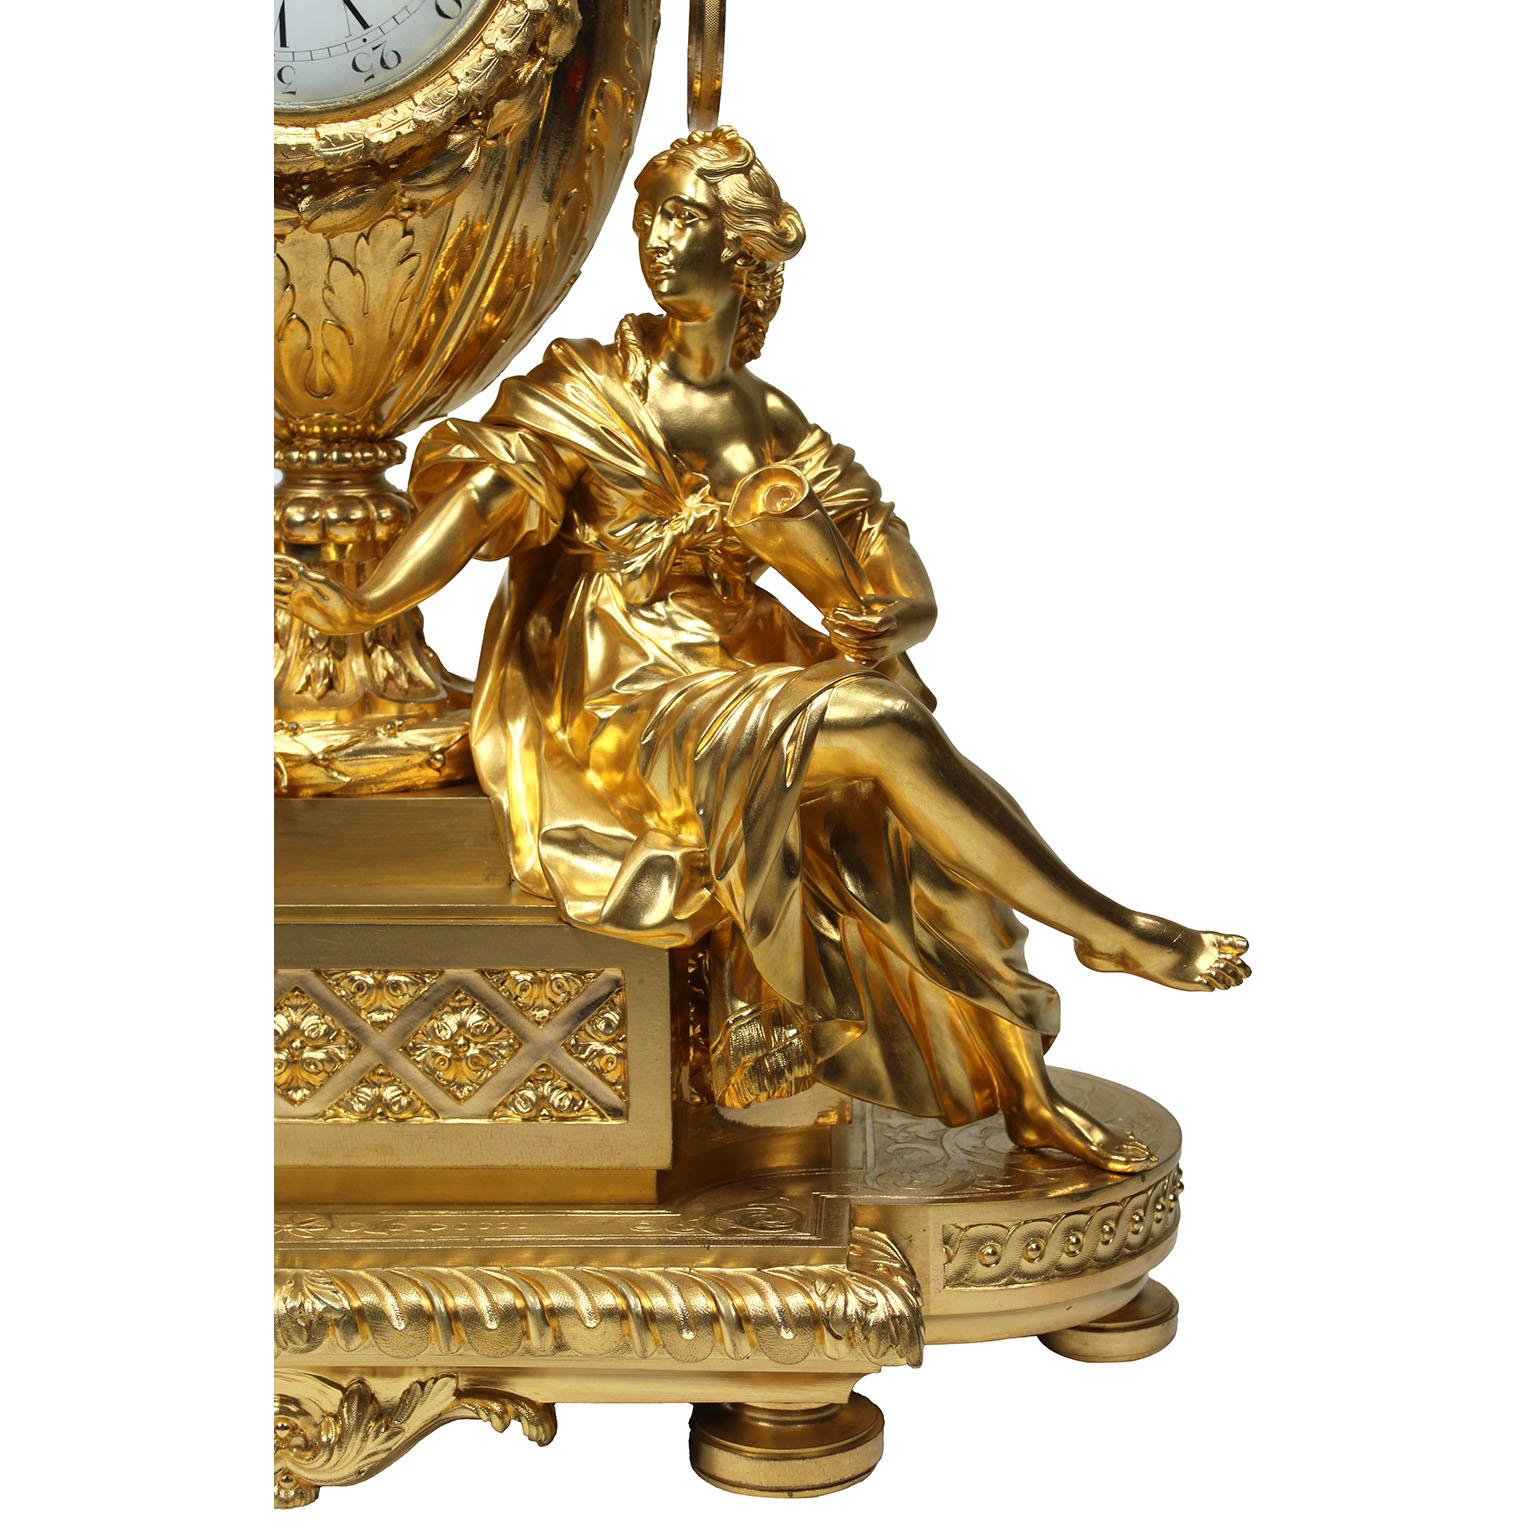 Louis XVI Style Gilt-Bronze Mantel Clock by Henri Picard & Fedinand Barbedienne In Good Condition For Sale In Los Angeles, CA